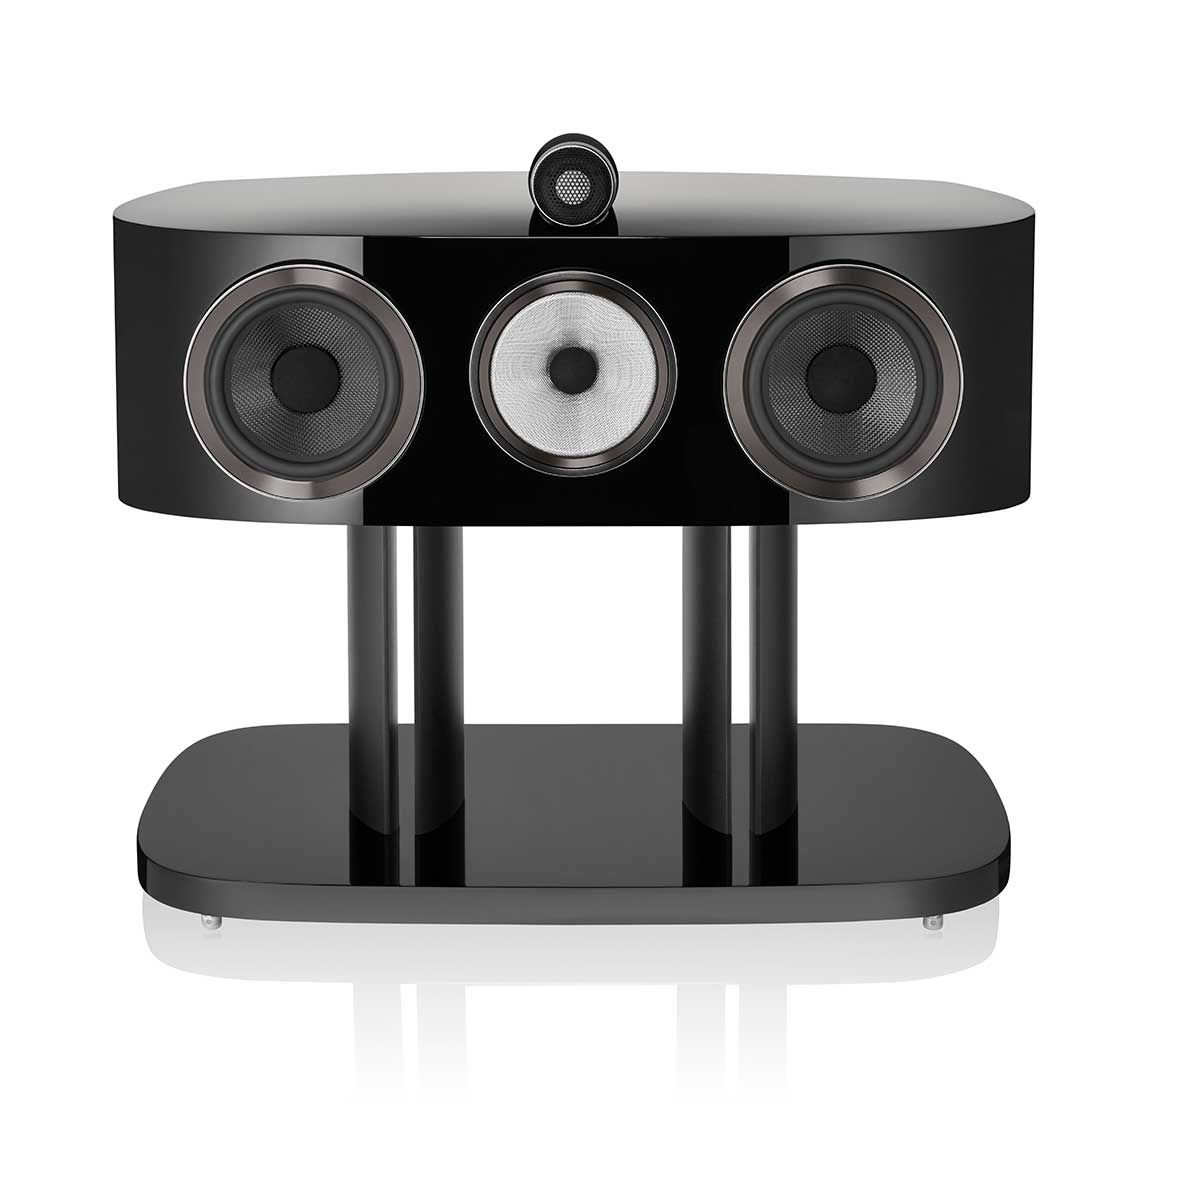 Bowers & Wilkins HTM82 D4 Center Channel Speaker, Gloss Black, front view without grille on stand